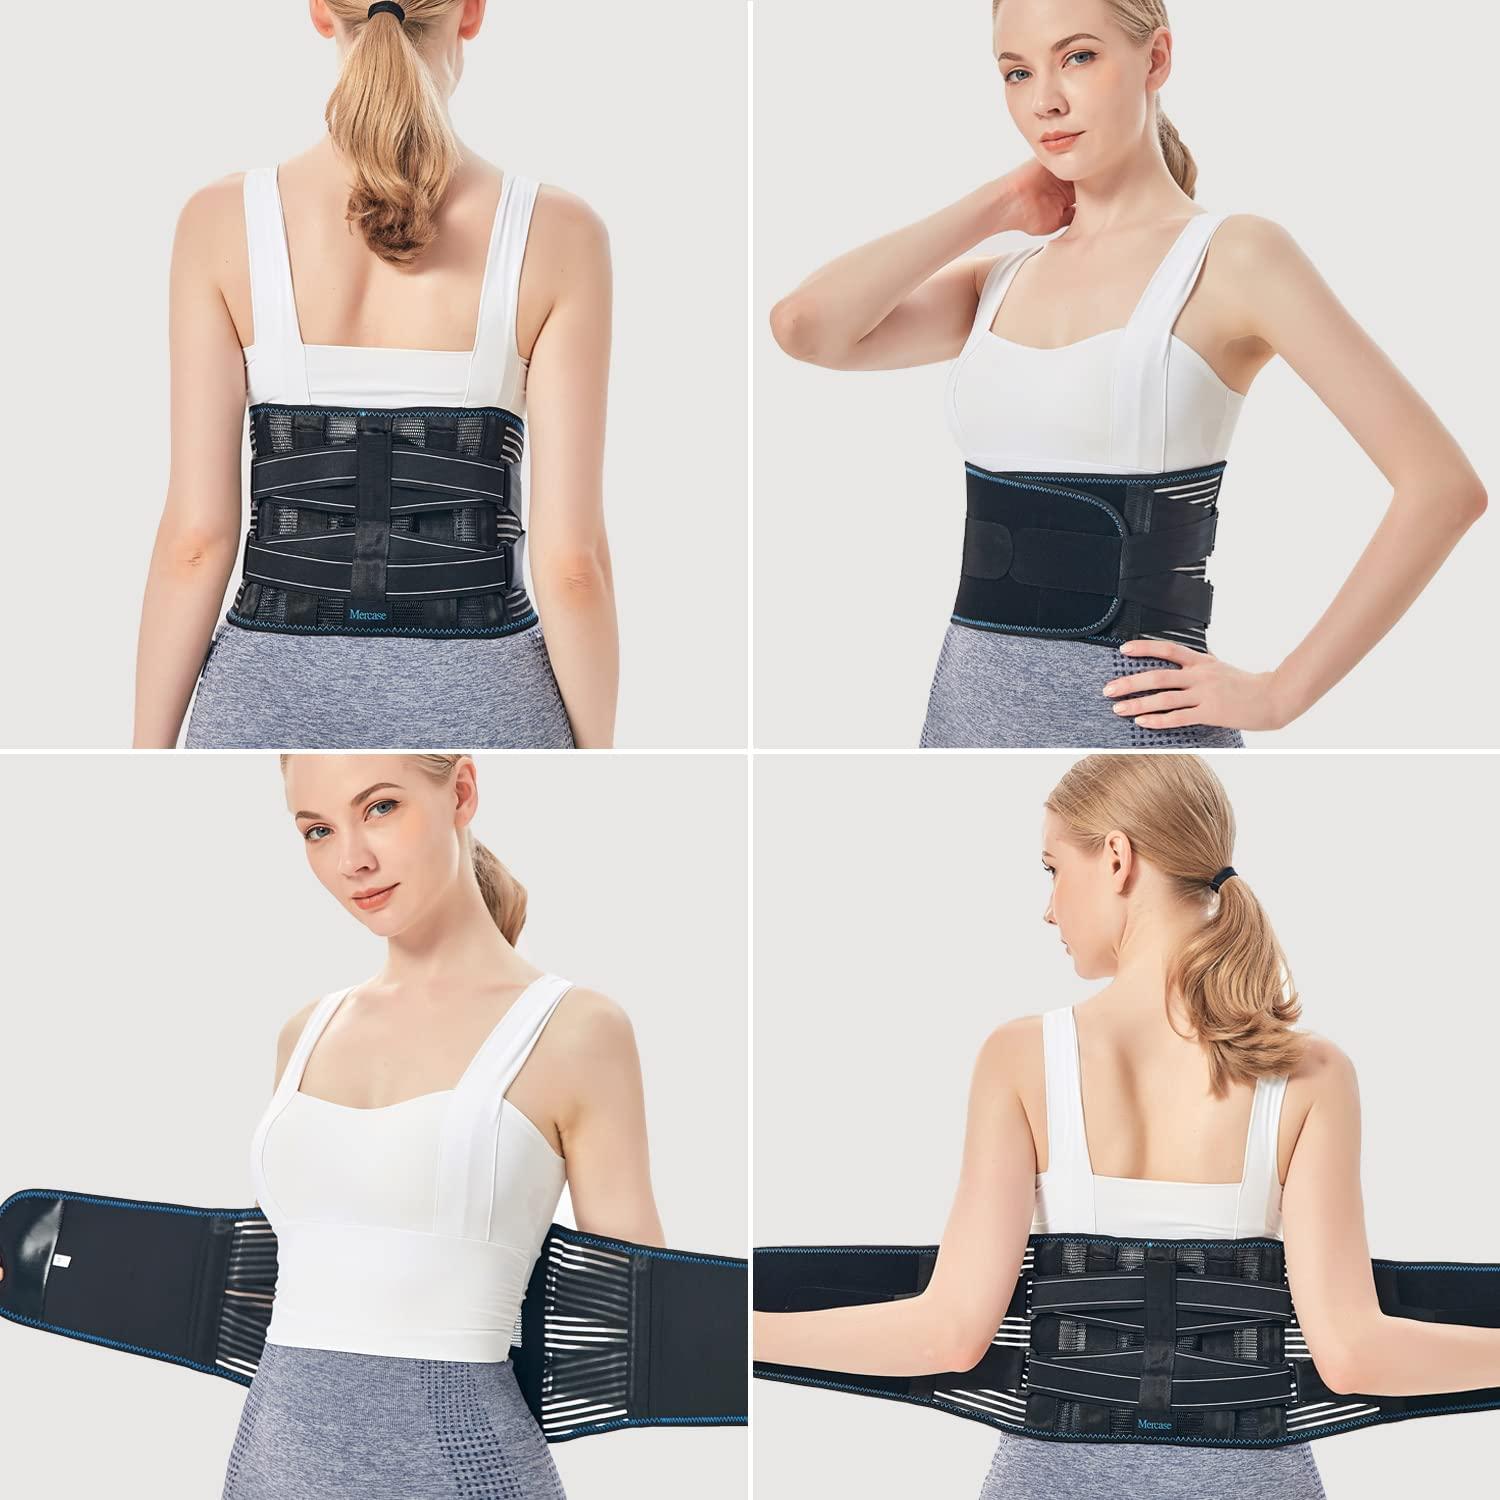 Mercase Back Brace for Lower Back Pain Relief, Back Support Belt for Men  and Women with Replaceable Support Stays, Breathable Lumbar Brace for Heavy  Lifting, Herniated Disc, Sciatica, Scoliosis (XL(43.3''-55.2''))